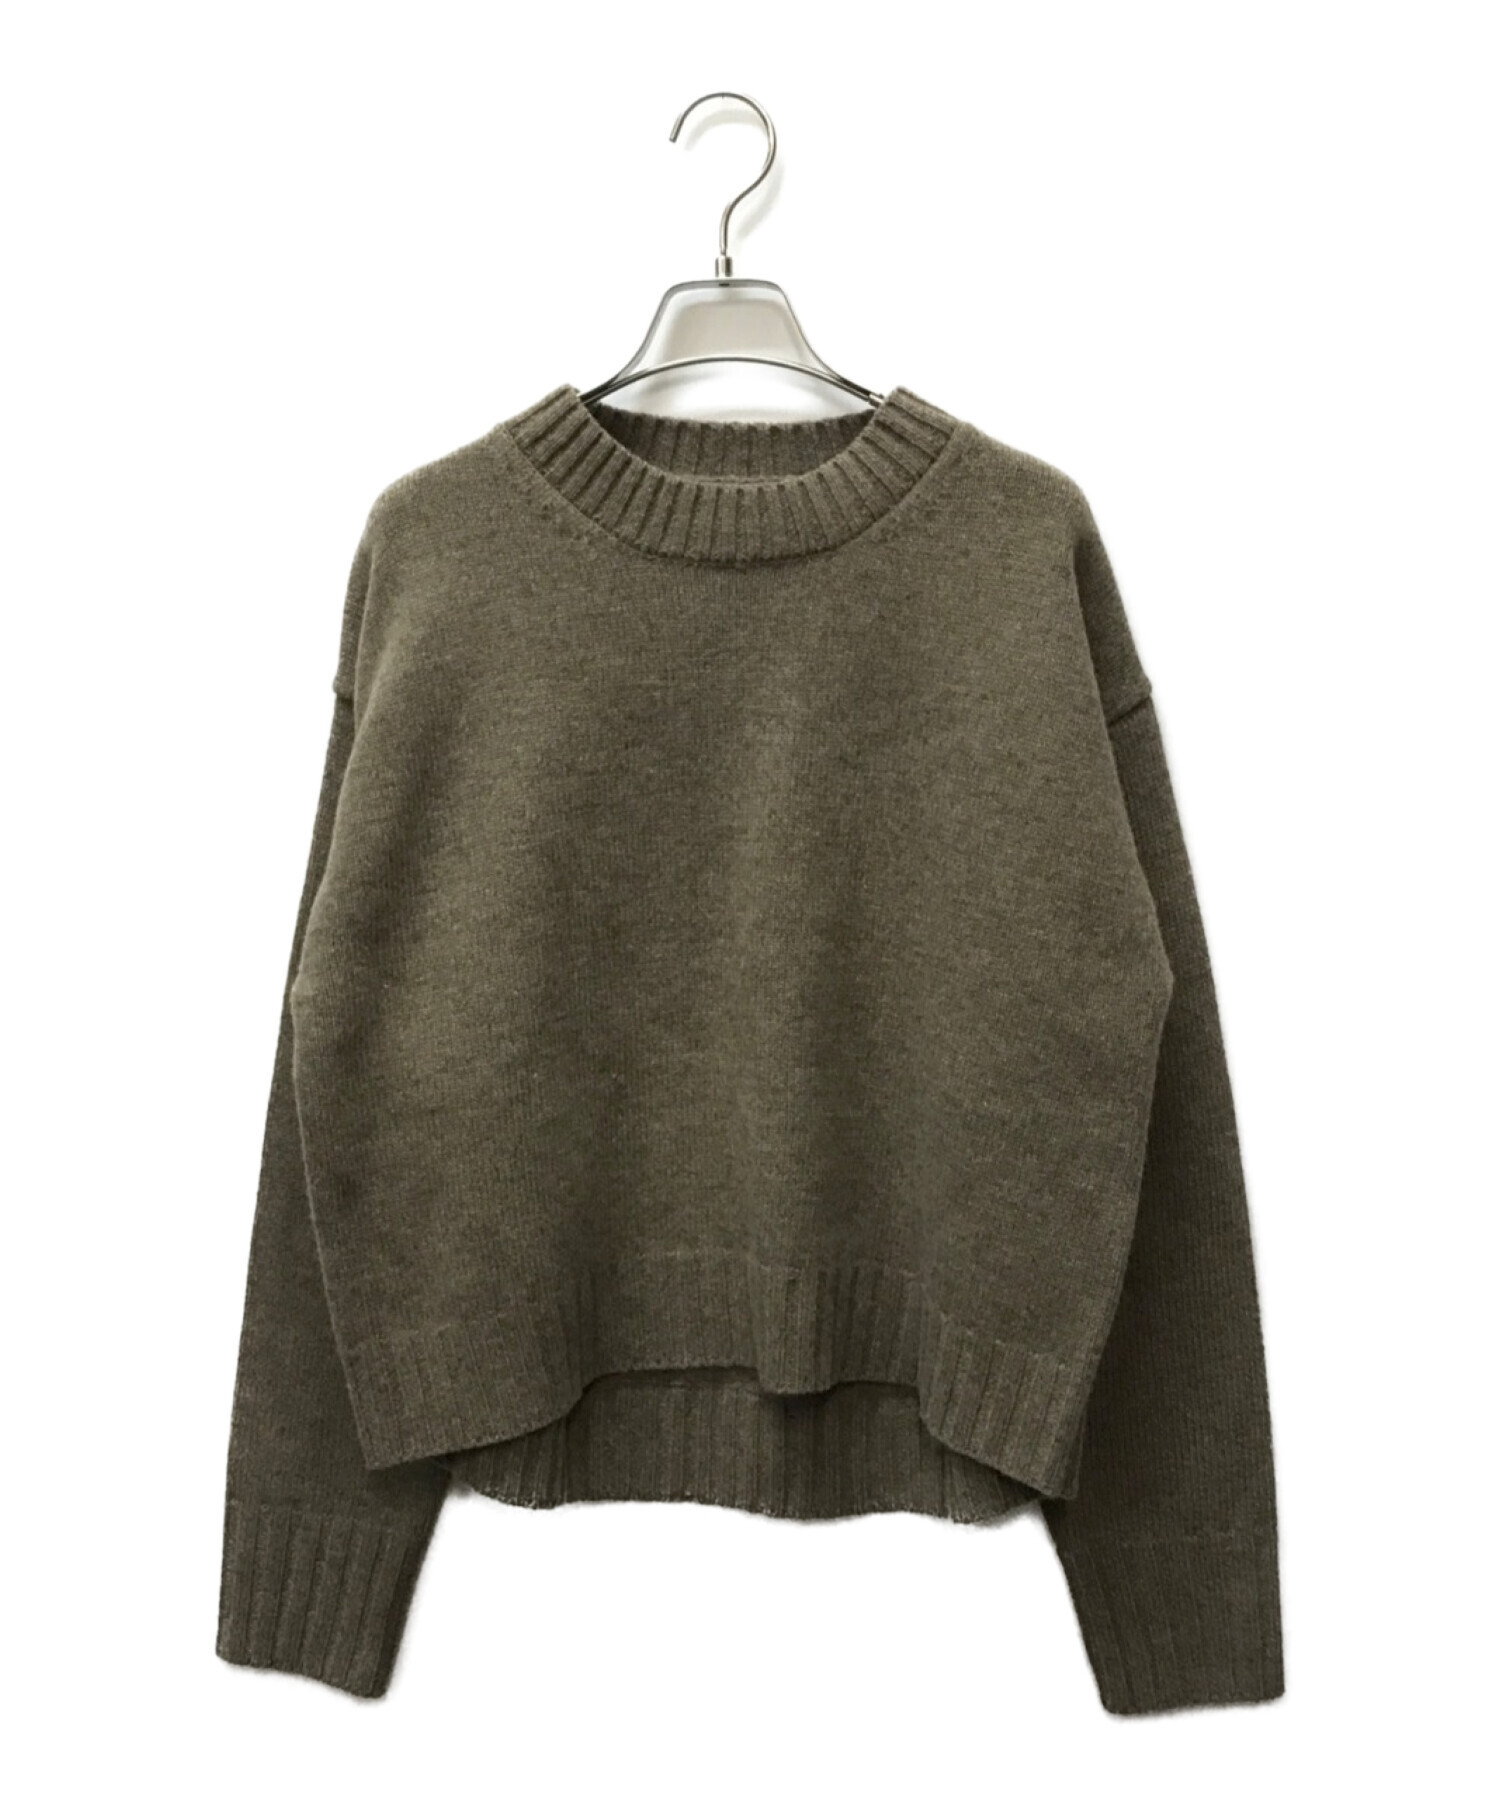 TODAYFUL Superfine Wool Knit